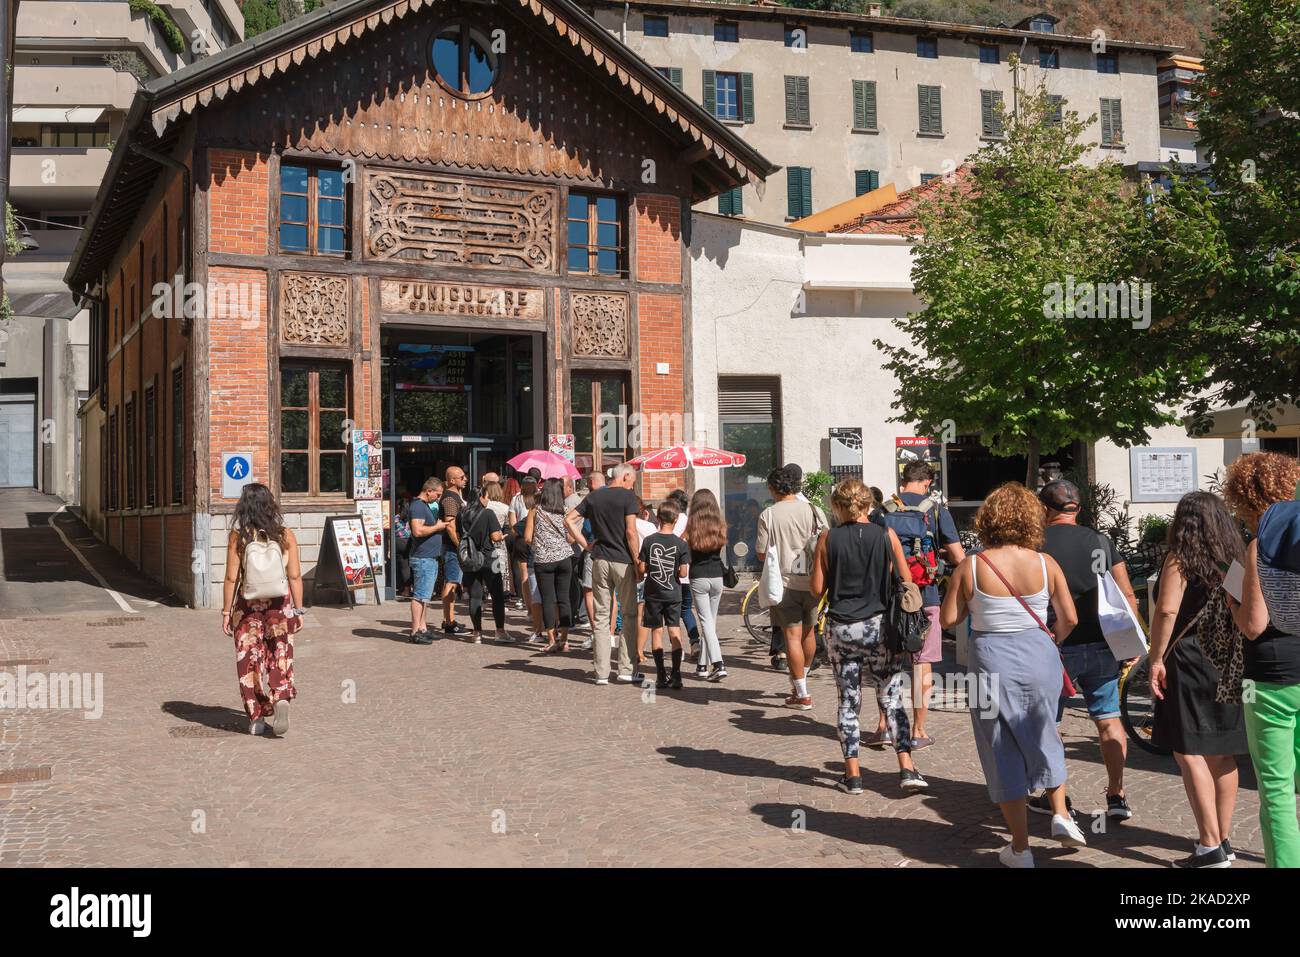 Como city funicular, view of people queuing at the Como - Brunate Stazione Funicolare in the city of Como, Lombardy, Italy Stock Photo